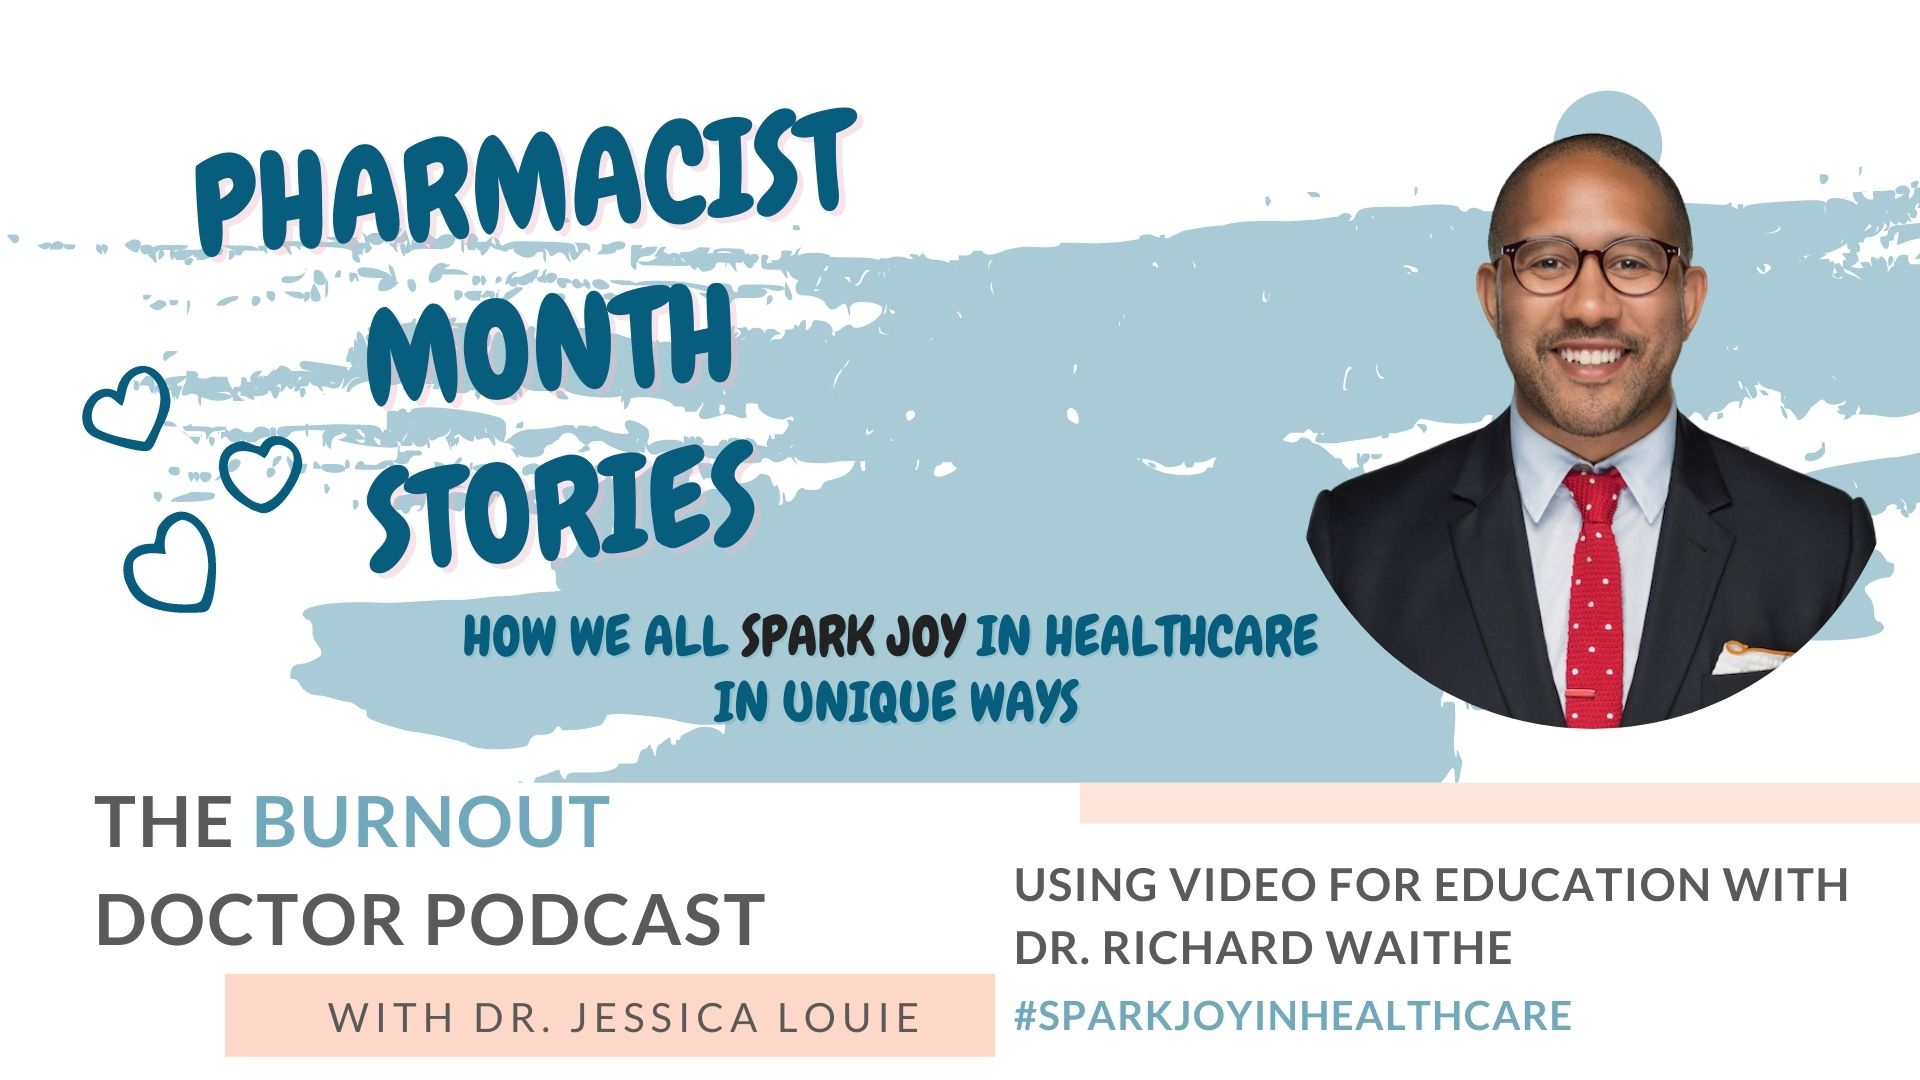 Dr. Richard Waite on The Burnout Doctor Podcast. Pharmacist burnout stories with Dr. Jessica Louie. Your Pharmacist Advocate. Spark Joy in Healthcare. Joy at Work. KonMari Simplifying in healthcare. RxRadio VUCA Health